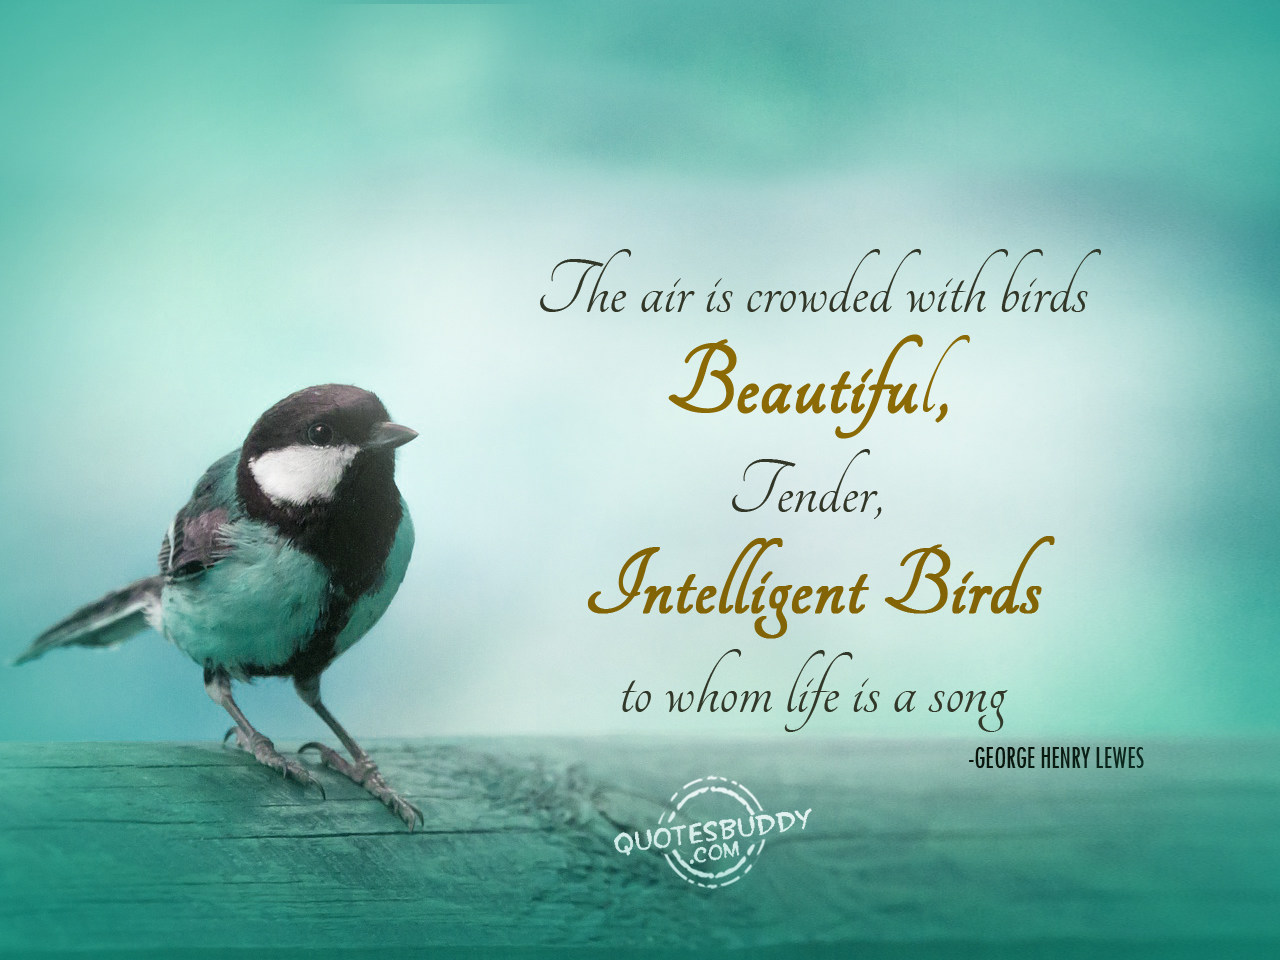 Птичка без слов. Quotes with Birds. Quotes about Birds. Beautiful Birds бренд. Quotes about early Birds.